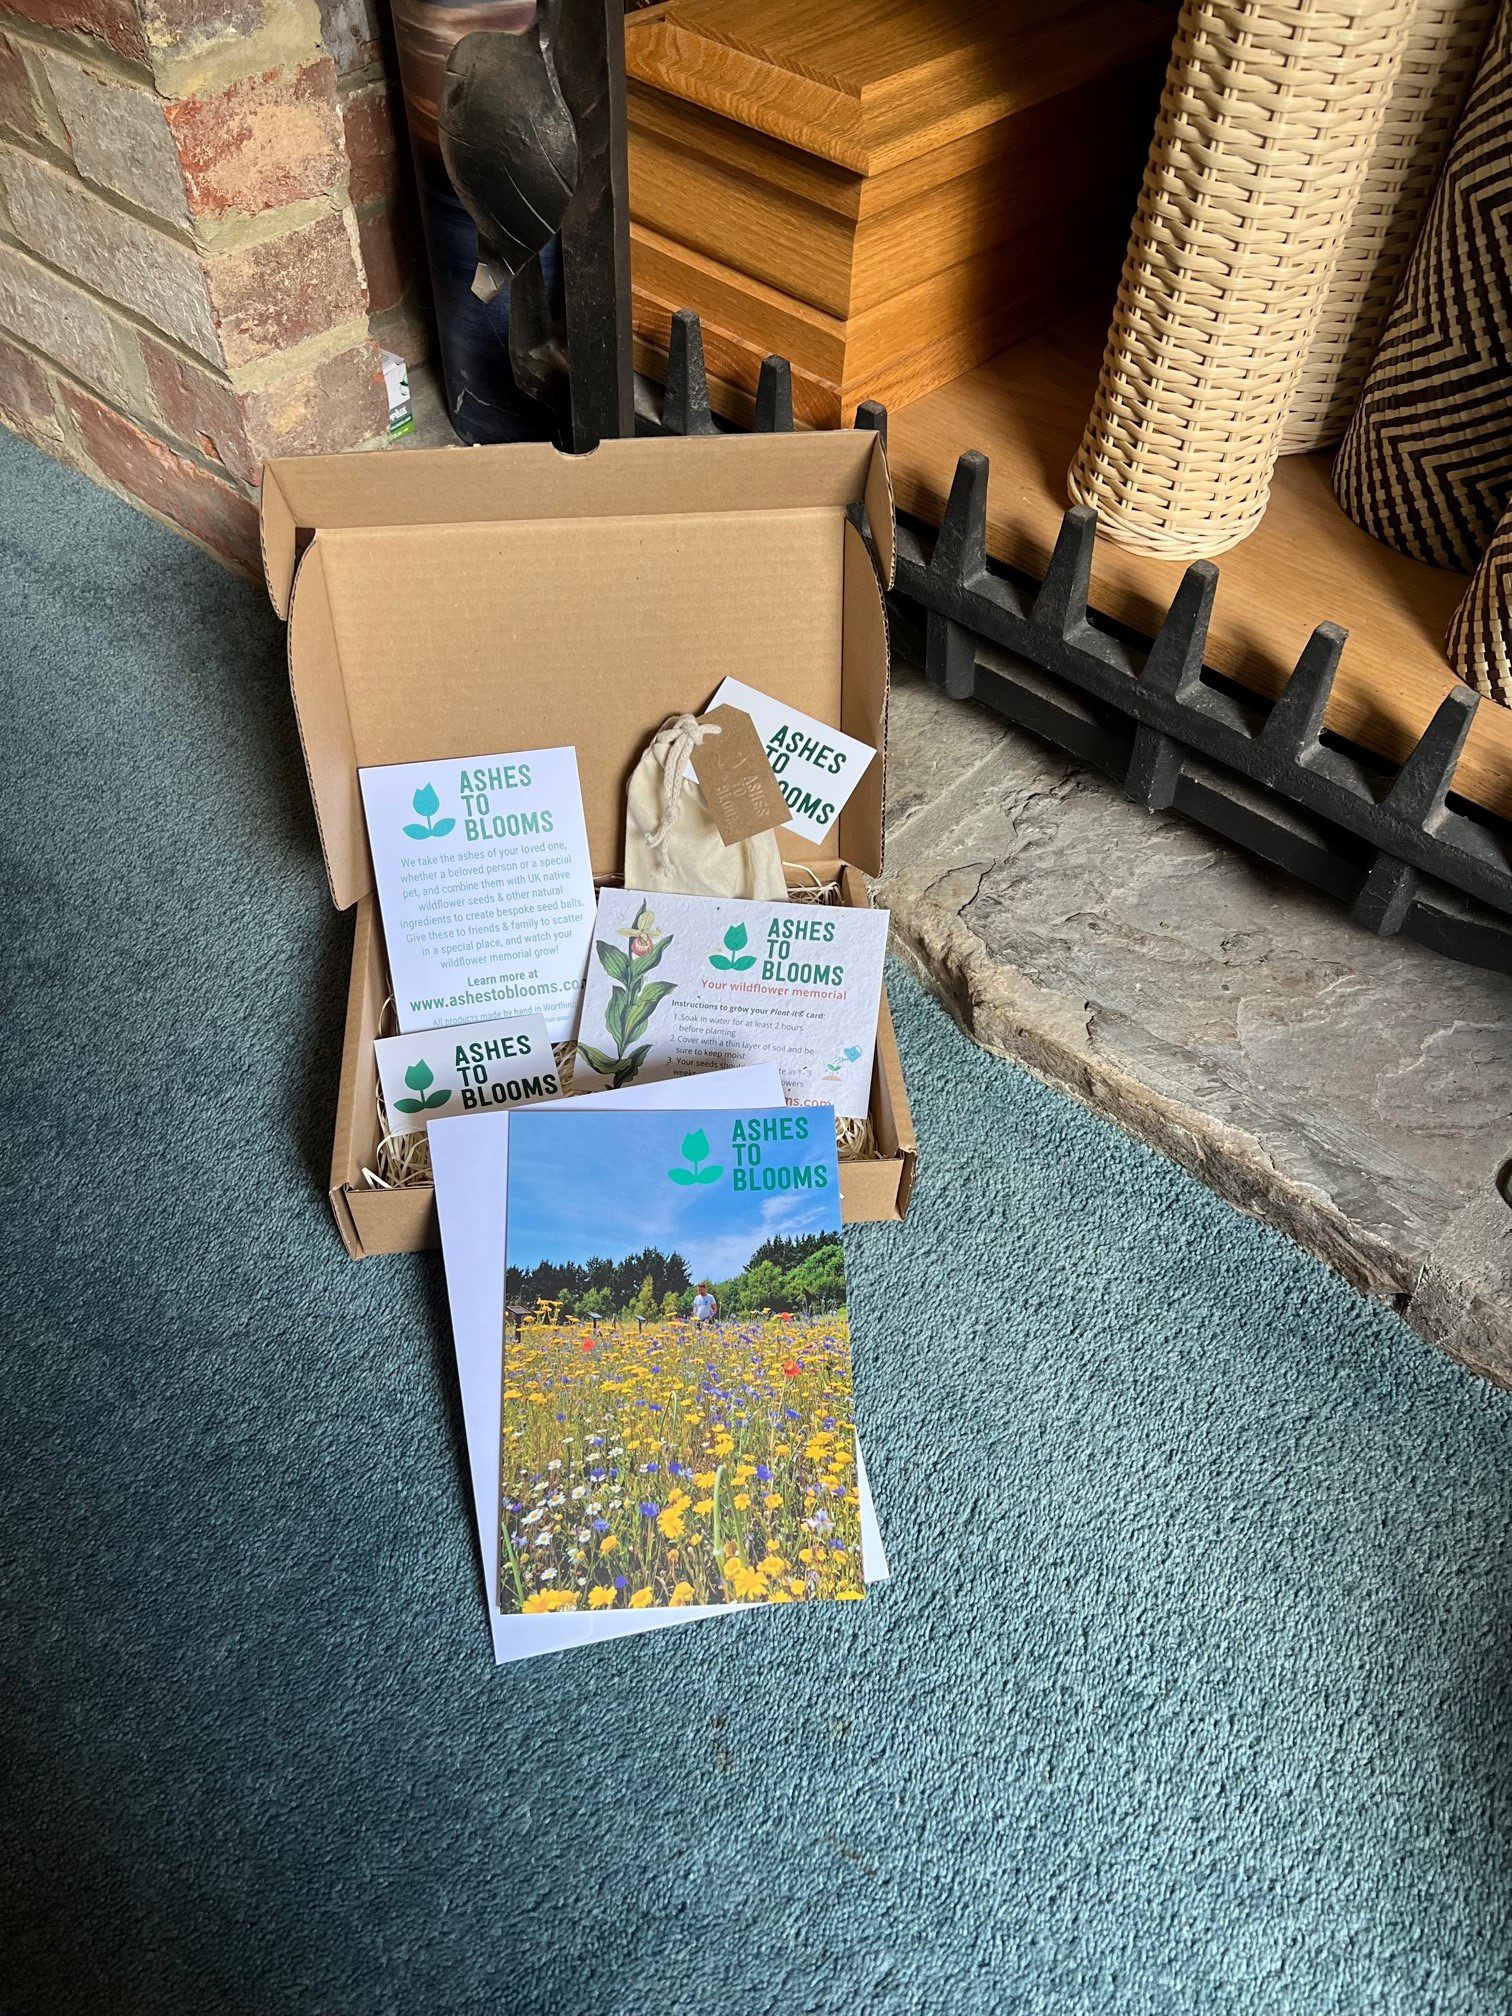 open brown cardboard box containing promotional flyers for Ashes to Blooms sits next to a fireplace. There is also a small cotton bag in the box, and a greetings card depicting a wildflower field in the foreground